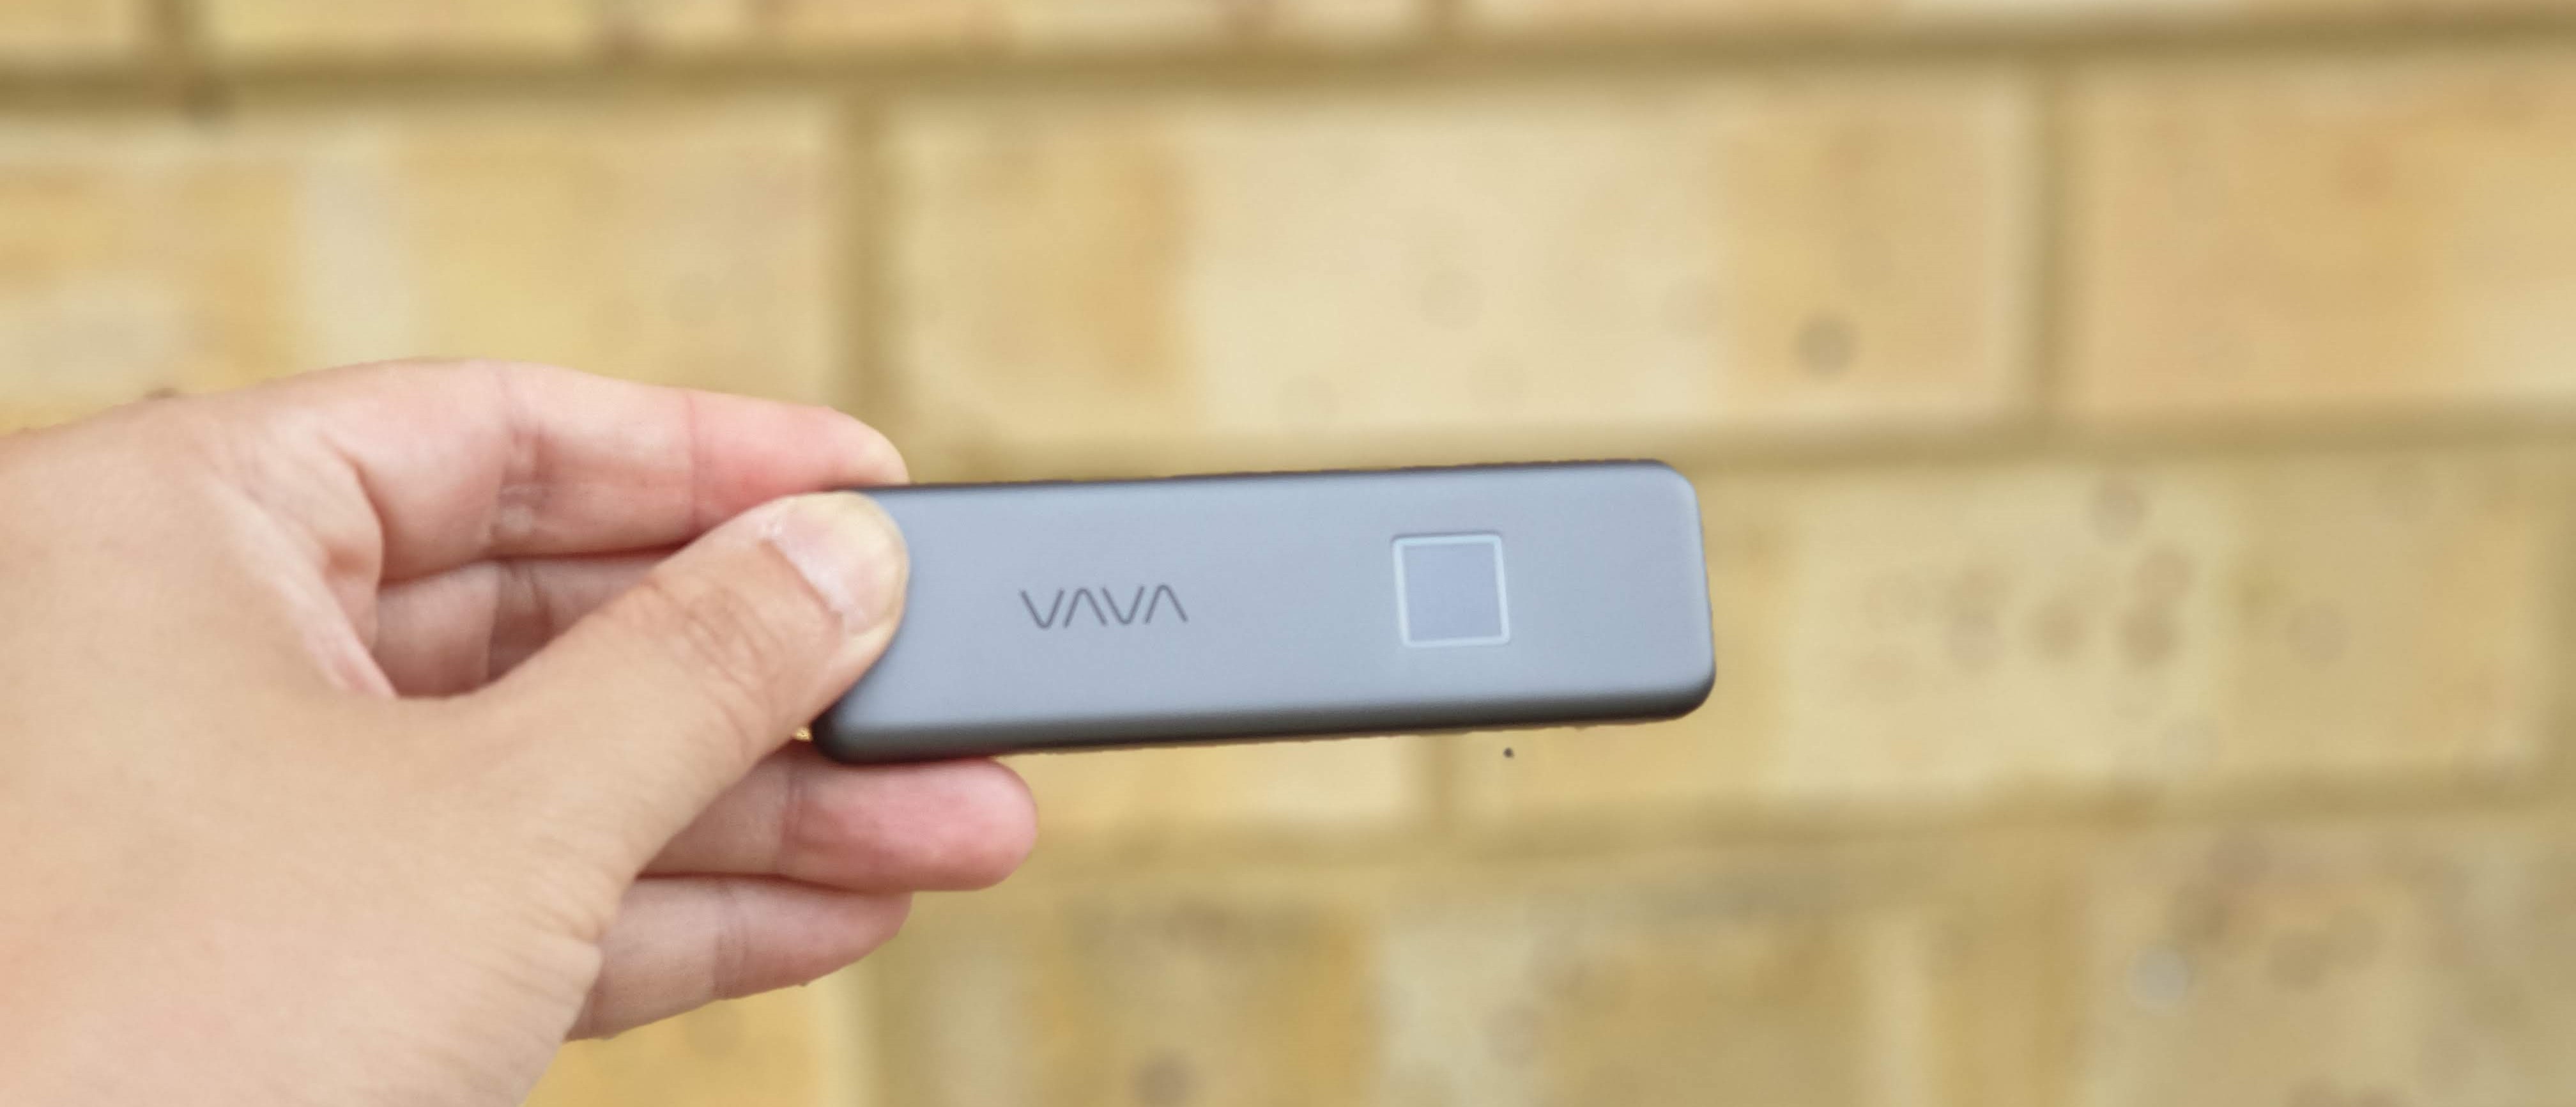 VAVA Portable SSD Touch 500GB secure solid state drive review